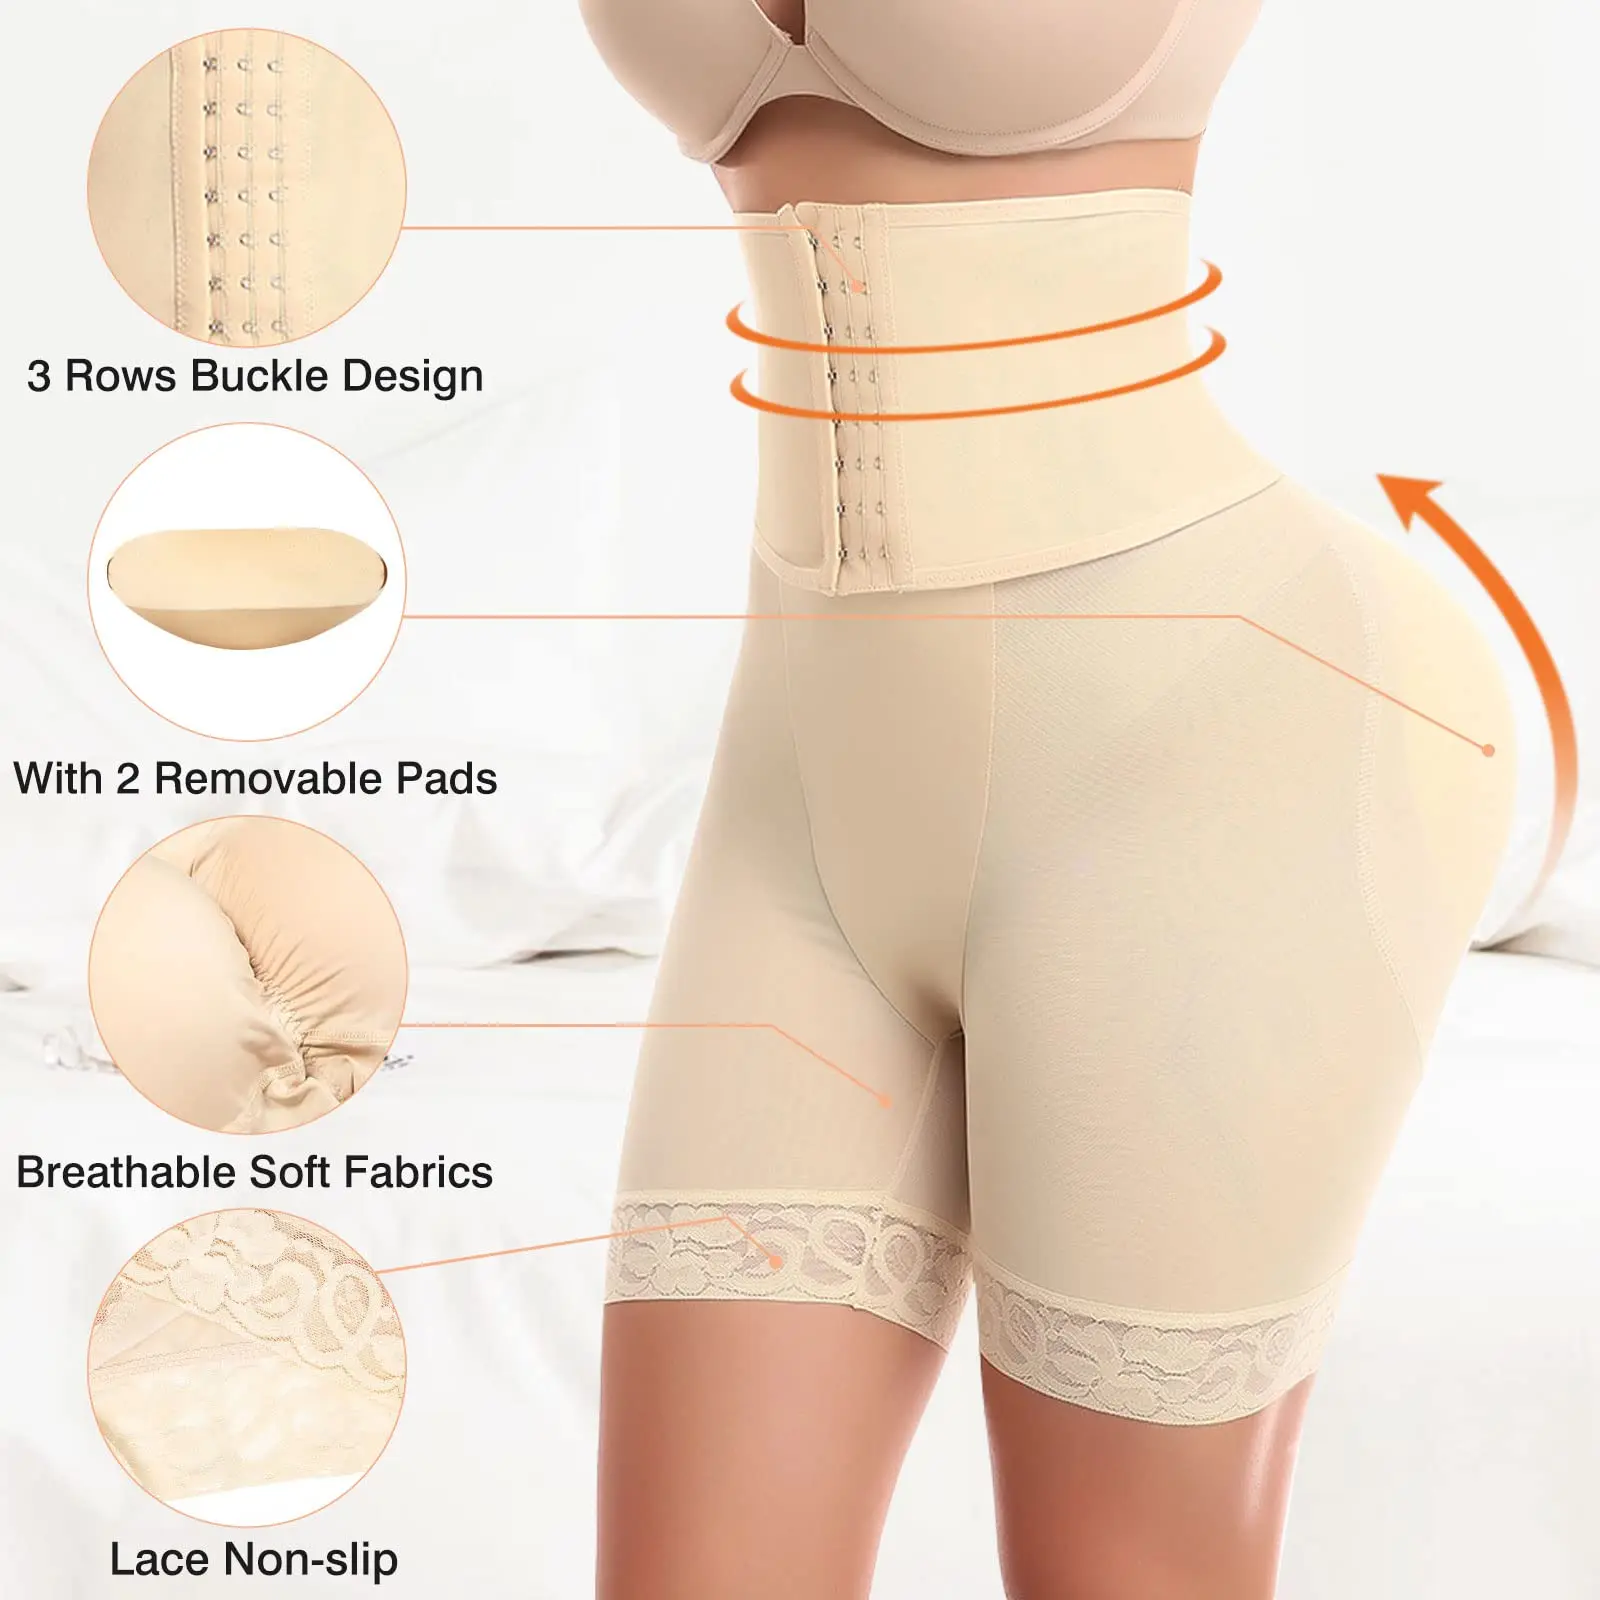 Hip Pads For Women Shapewear Butt Pads for Bigger Butt and Hip